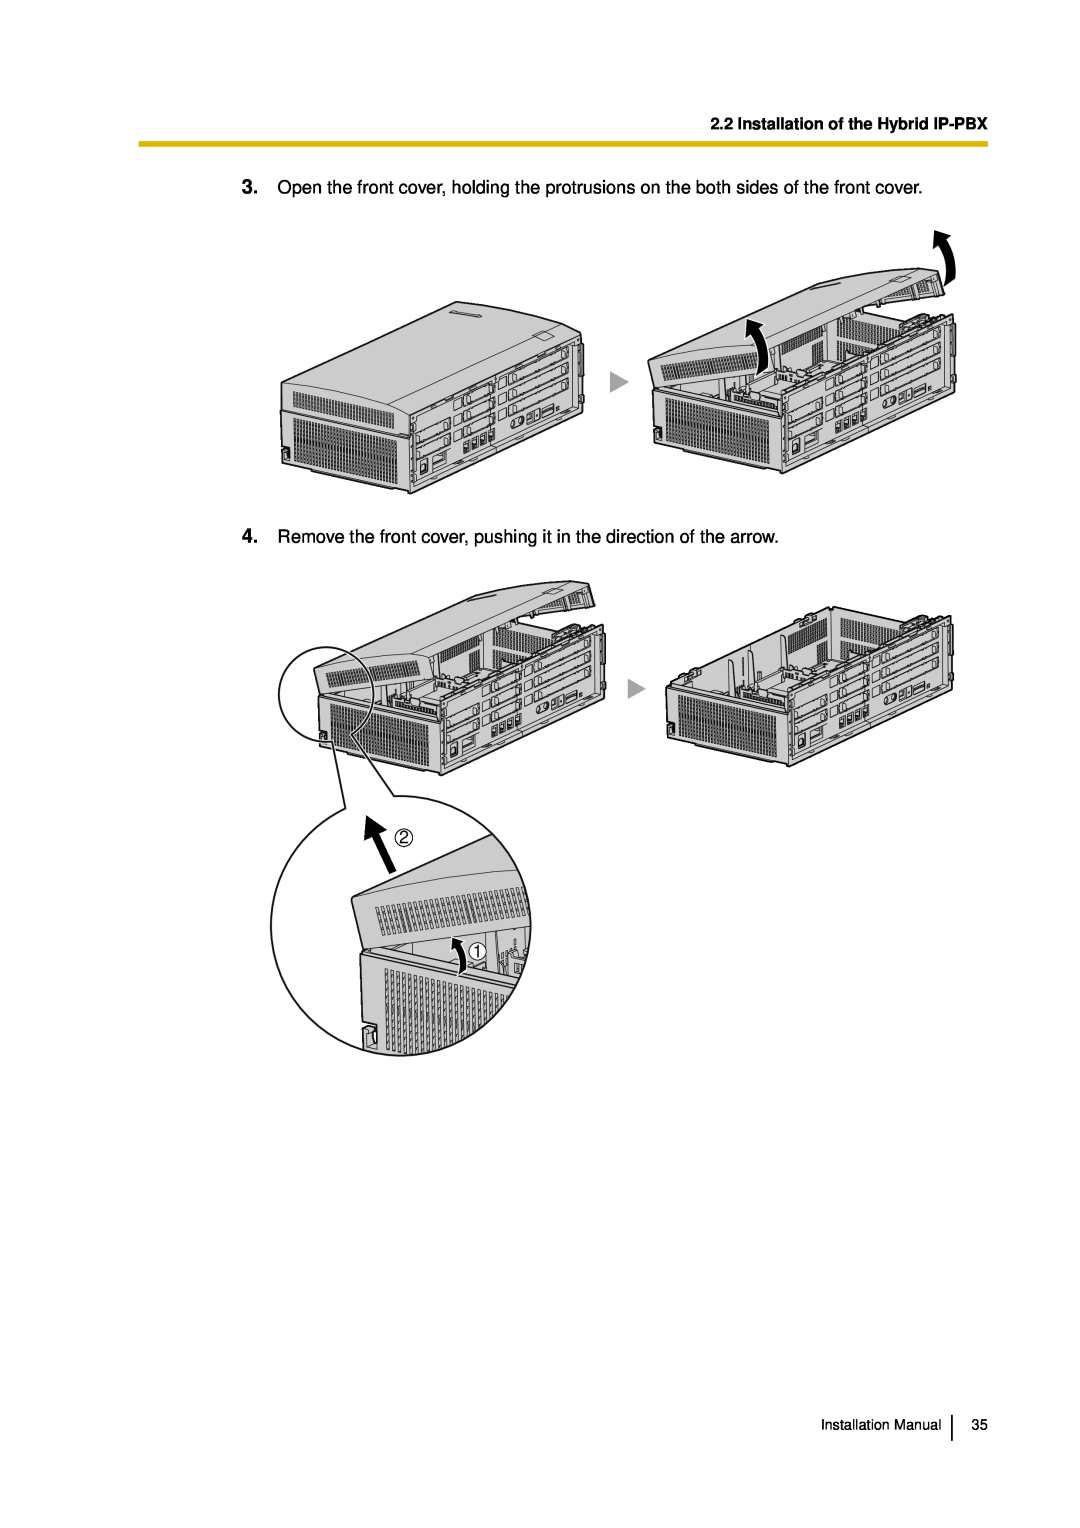 Panasonic KX-TDA30 installation manual Open the front cover, holding the protrusions on the both sides of the front cover 